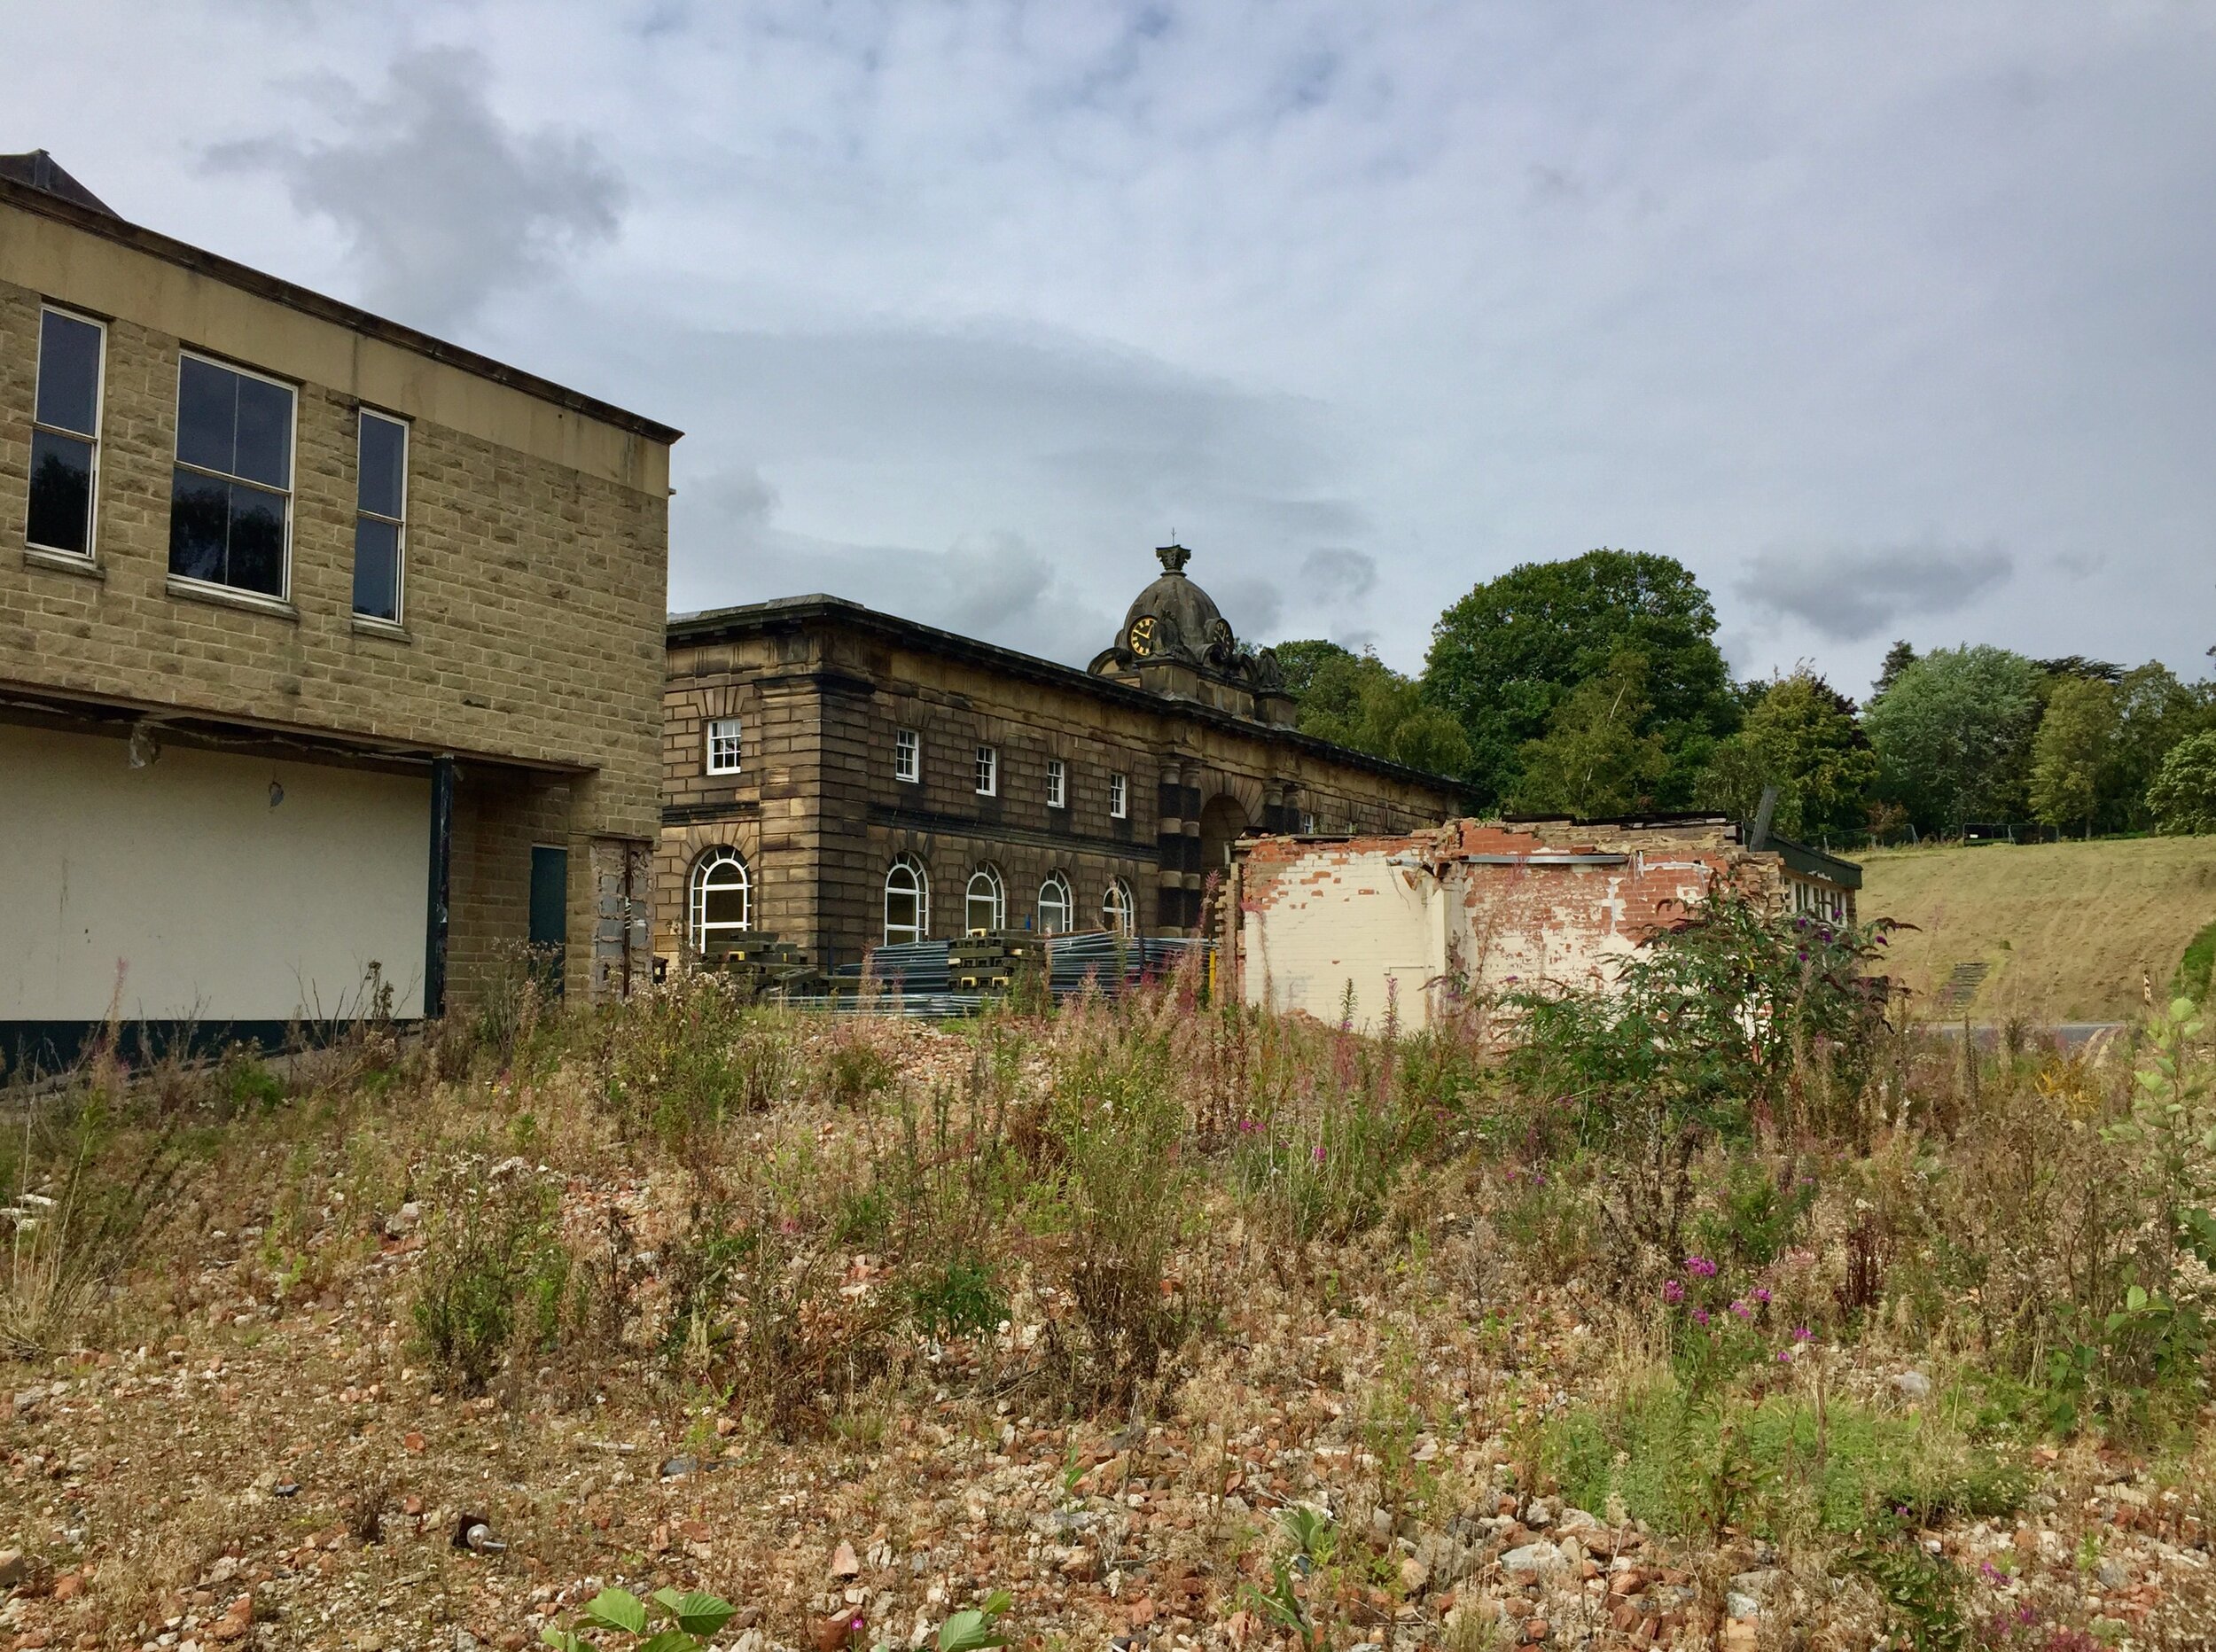  The wasteland of demolition. From left to right, there’s the Alec Clegg Building, the Stable Block, and the remaining scrap of dining hall. 